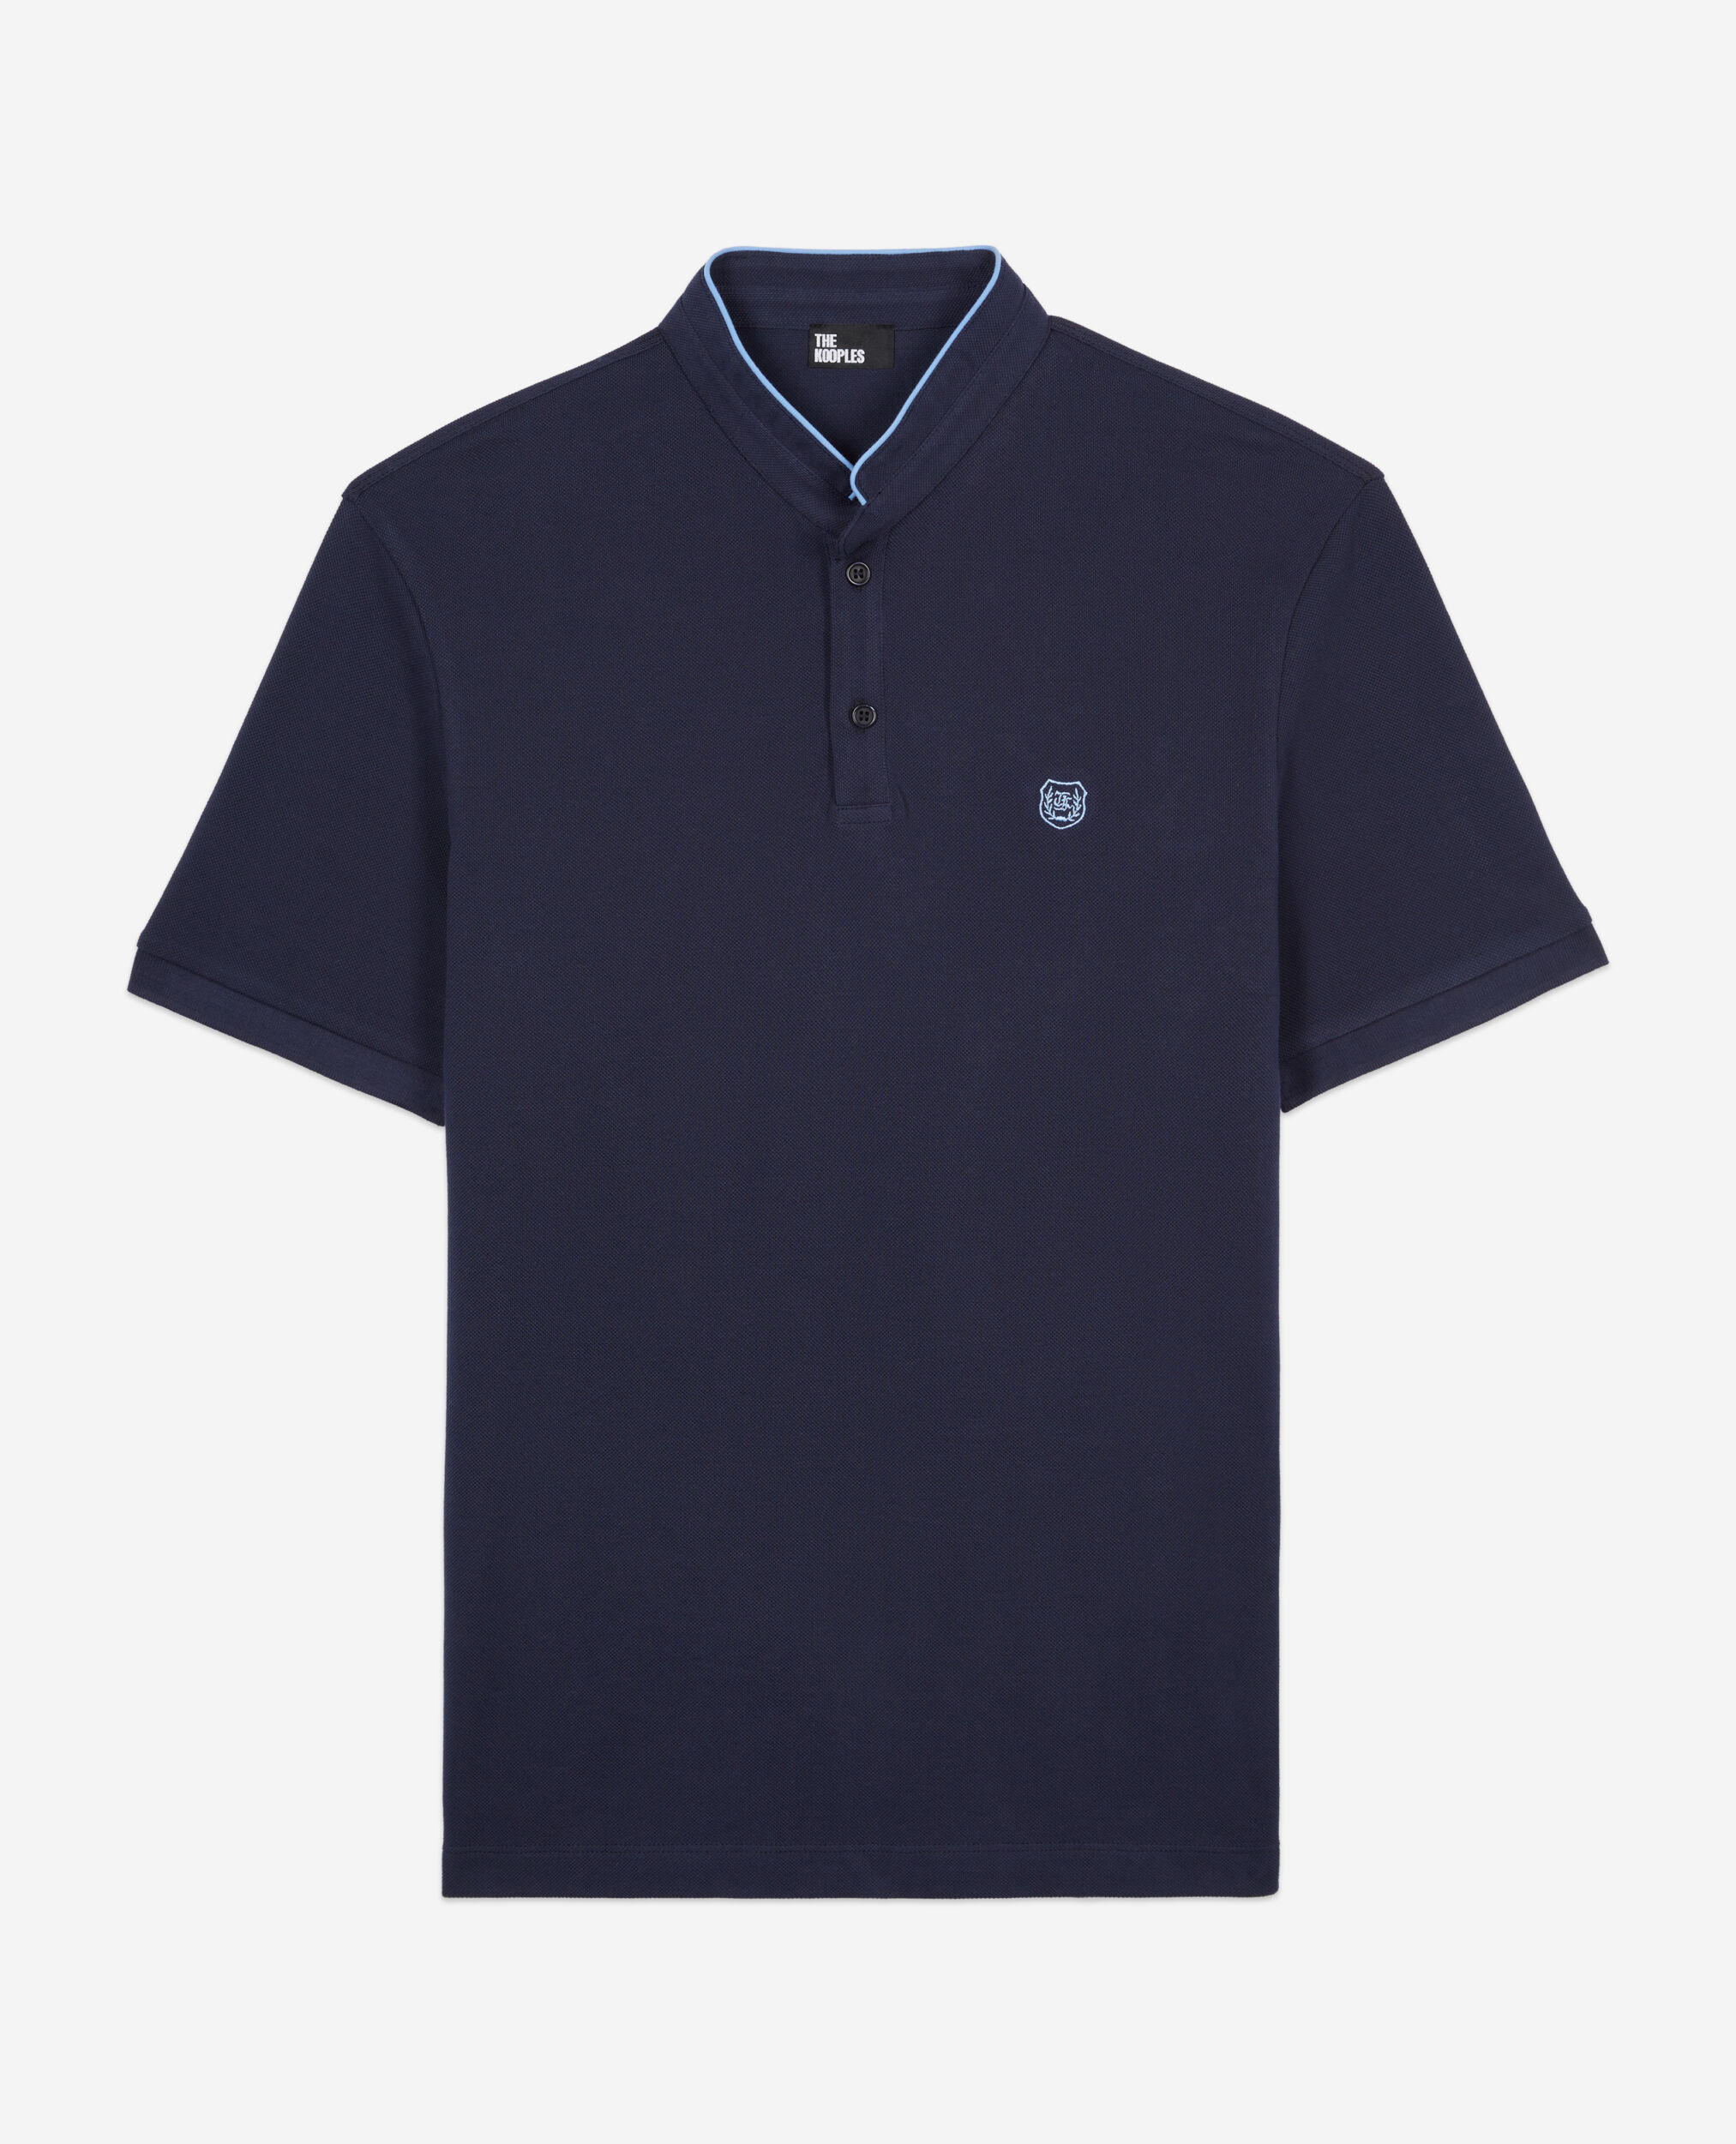 Navy blue pique cotton polo t-shirt, NAVY/ PIPING NAVY, hi-res image number null